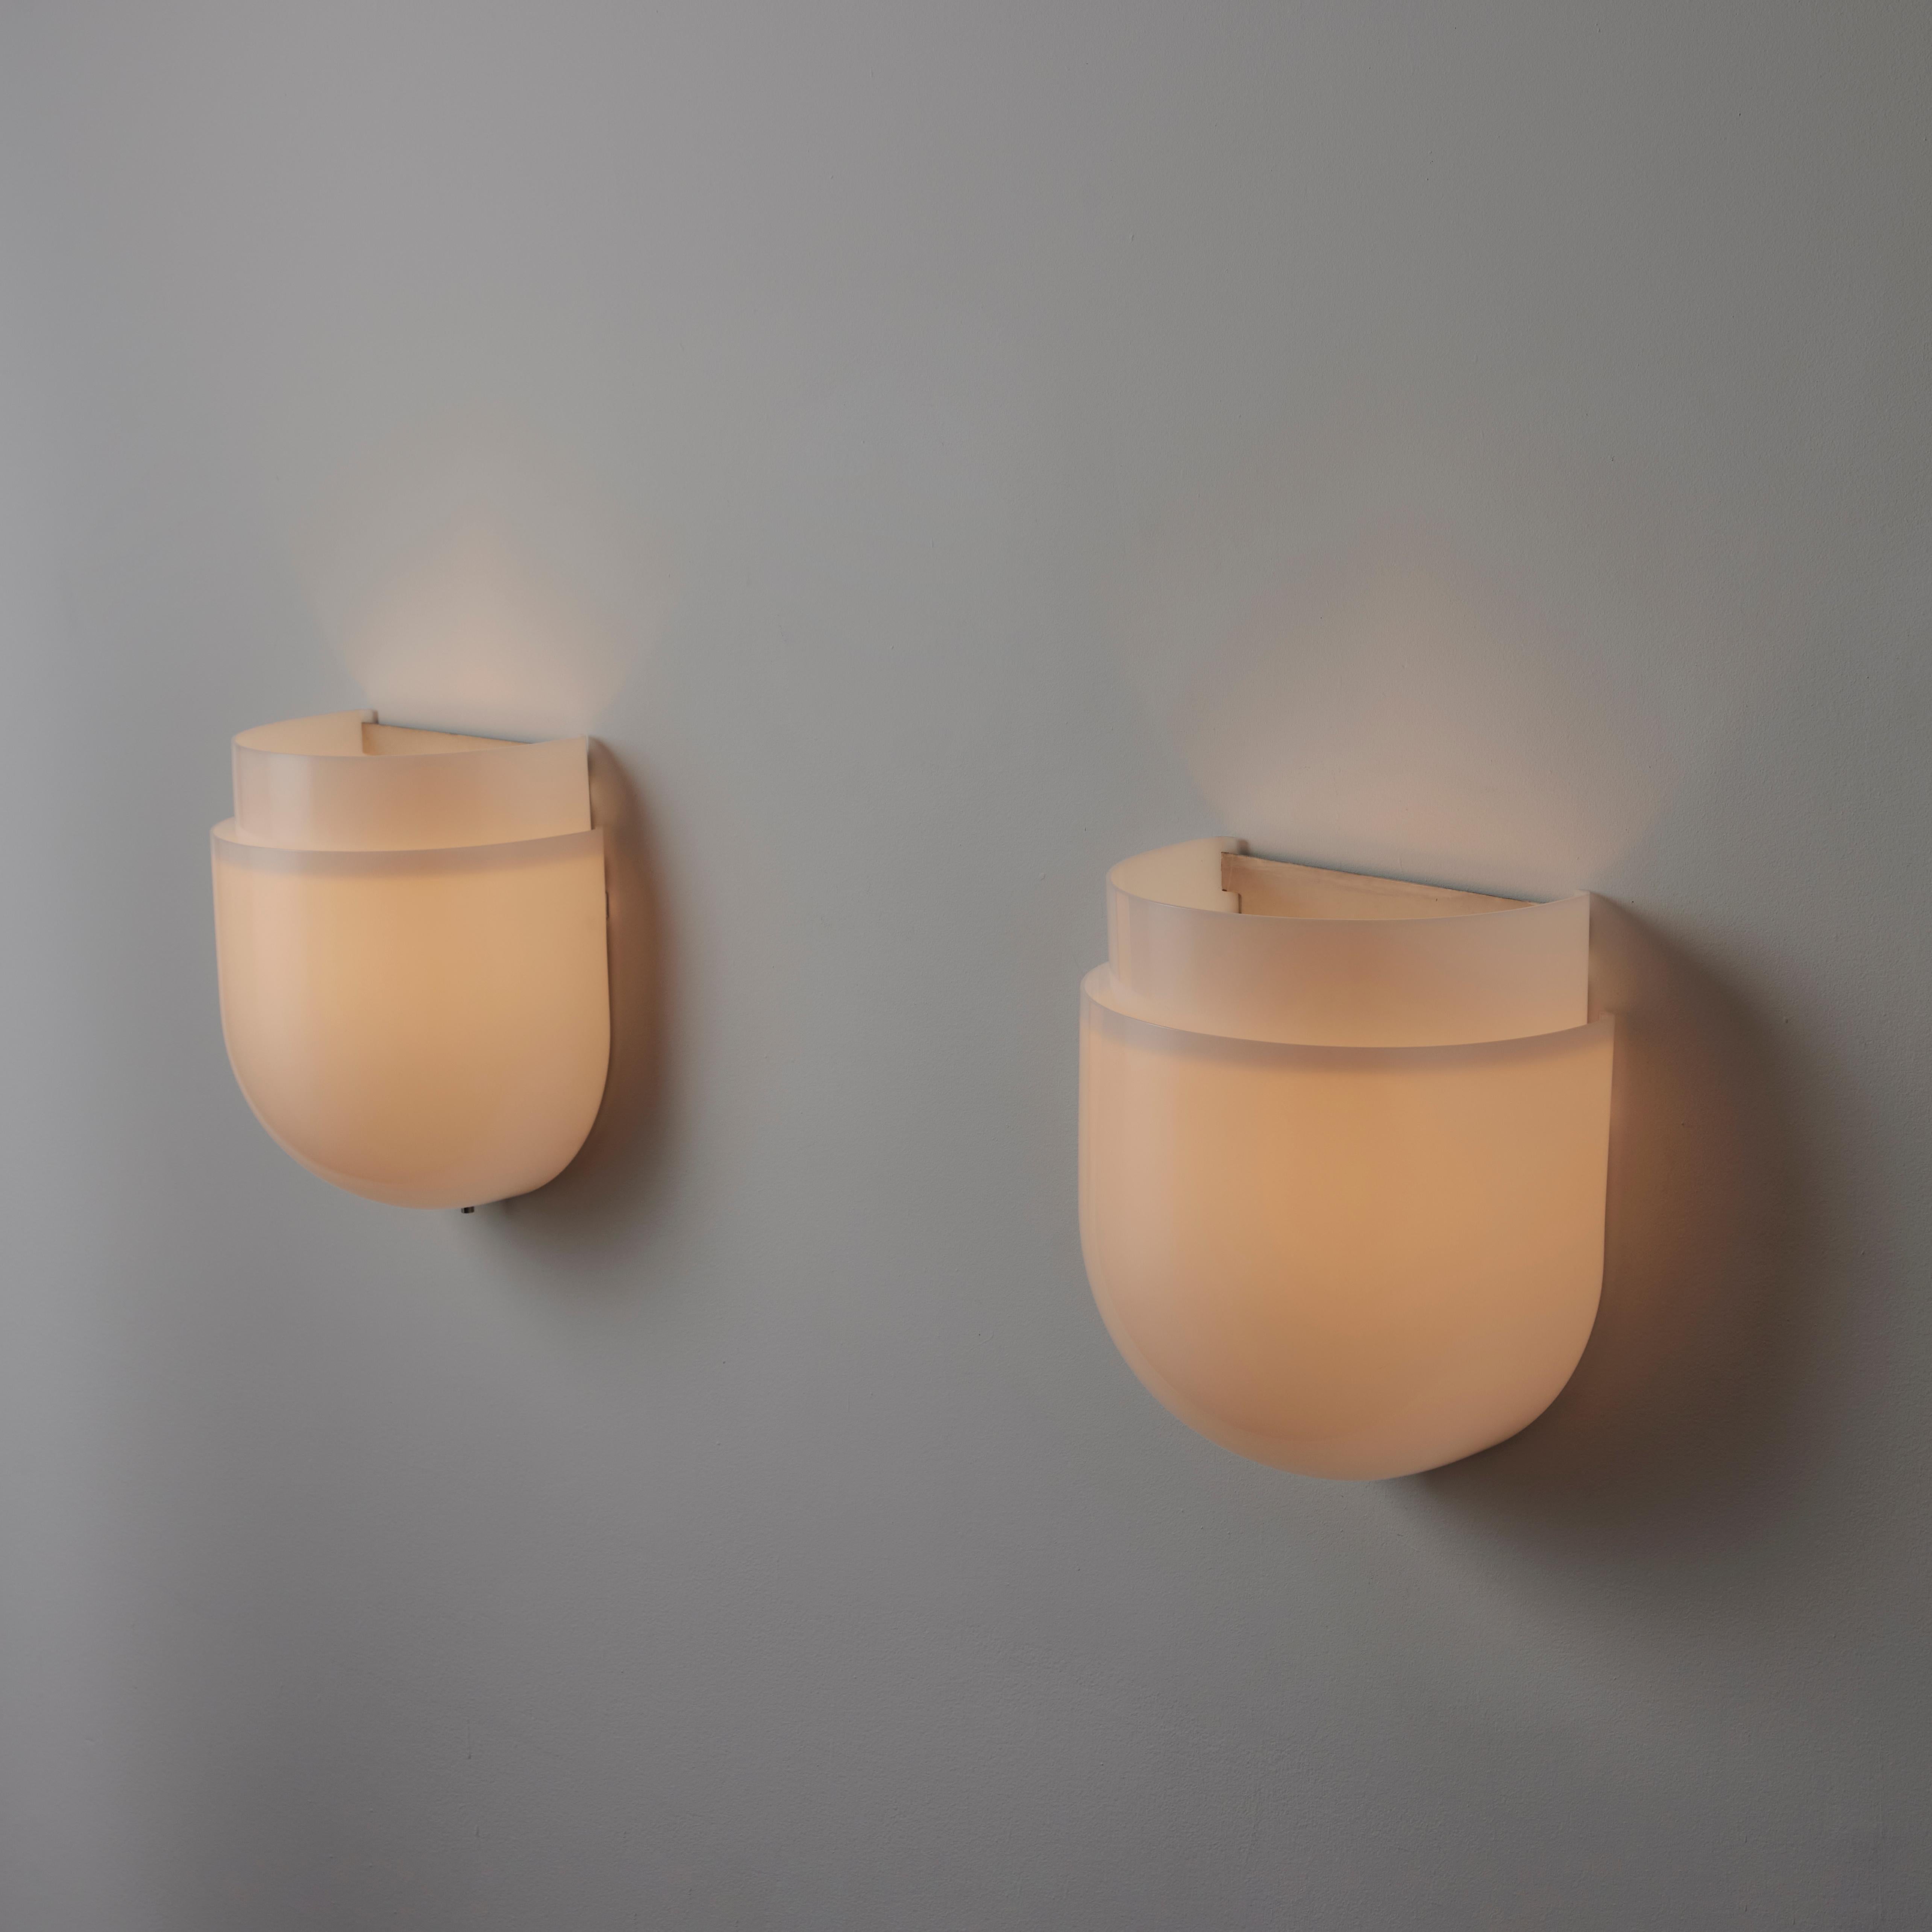 'Montparnasse' Sconces by Sergio Asti for Candle. Designed and manufactured in Italy, circa the 1970s. Double-breasted white acrylic shields form these minimal sconces. Each sconce holds an E27 socket type, adapted for the US. We recommend a 25 to